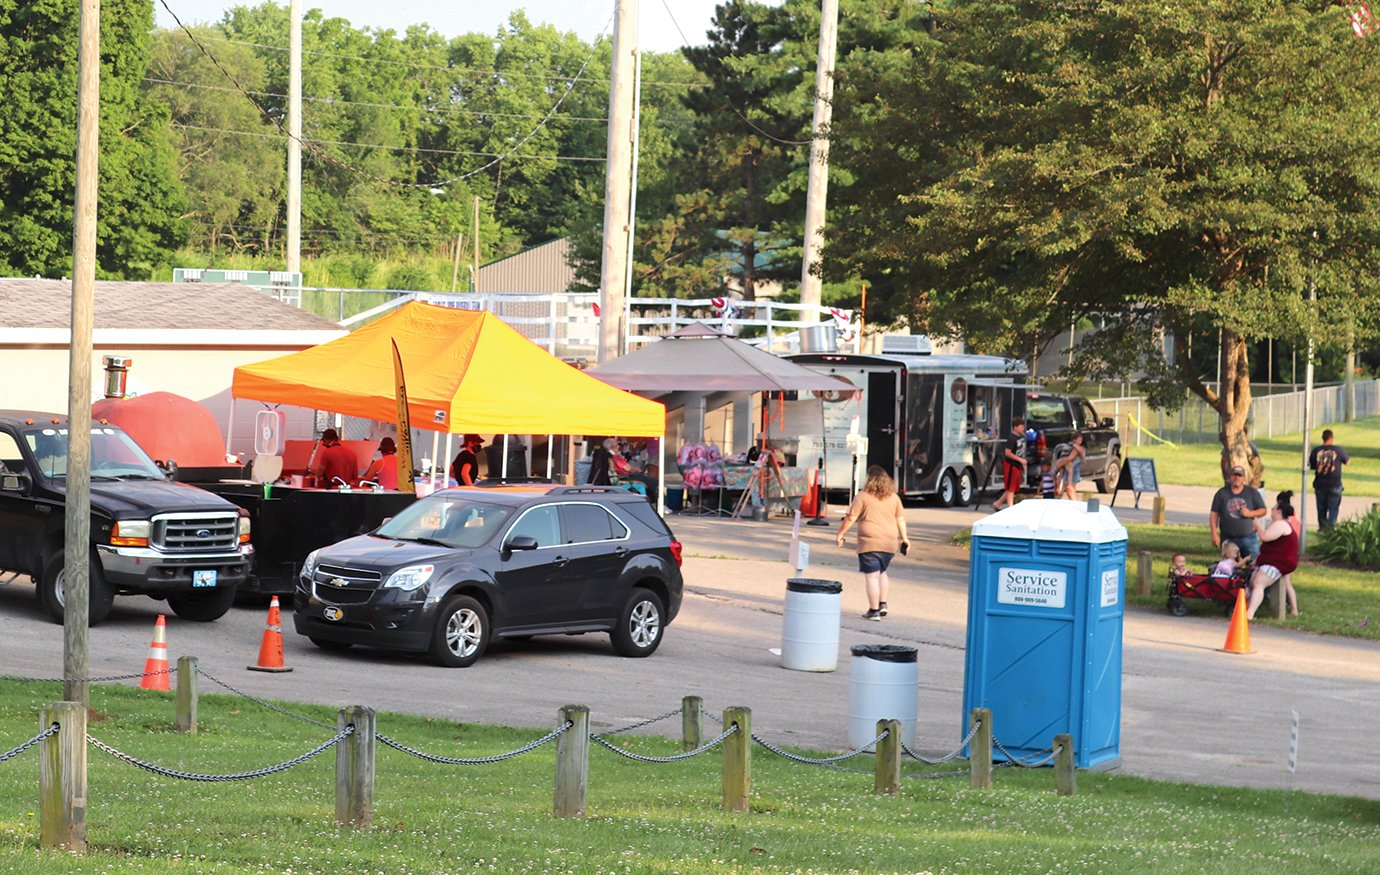 Tents and trailers for Wildfire 348, from left, Cotton Candy Annie and 1832 Brew line the bleacher section of Baldwin Memorial Field on Saturday ahead of the annual fireworks display at Milligan Park.